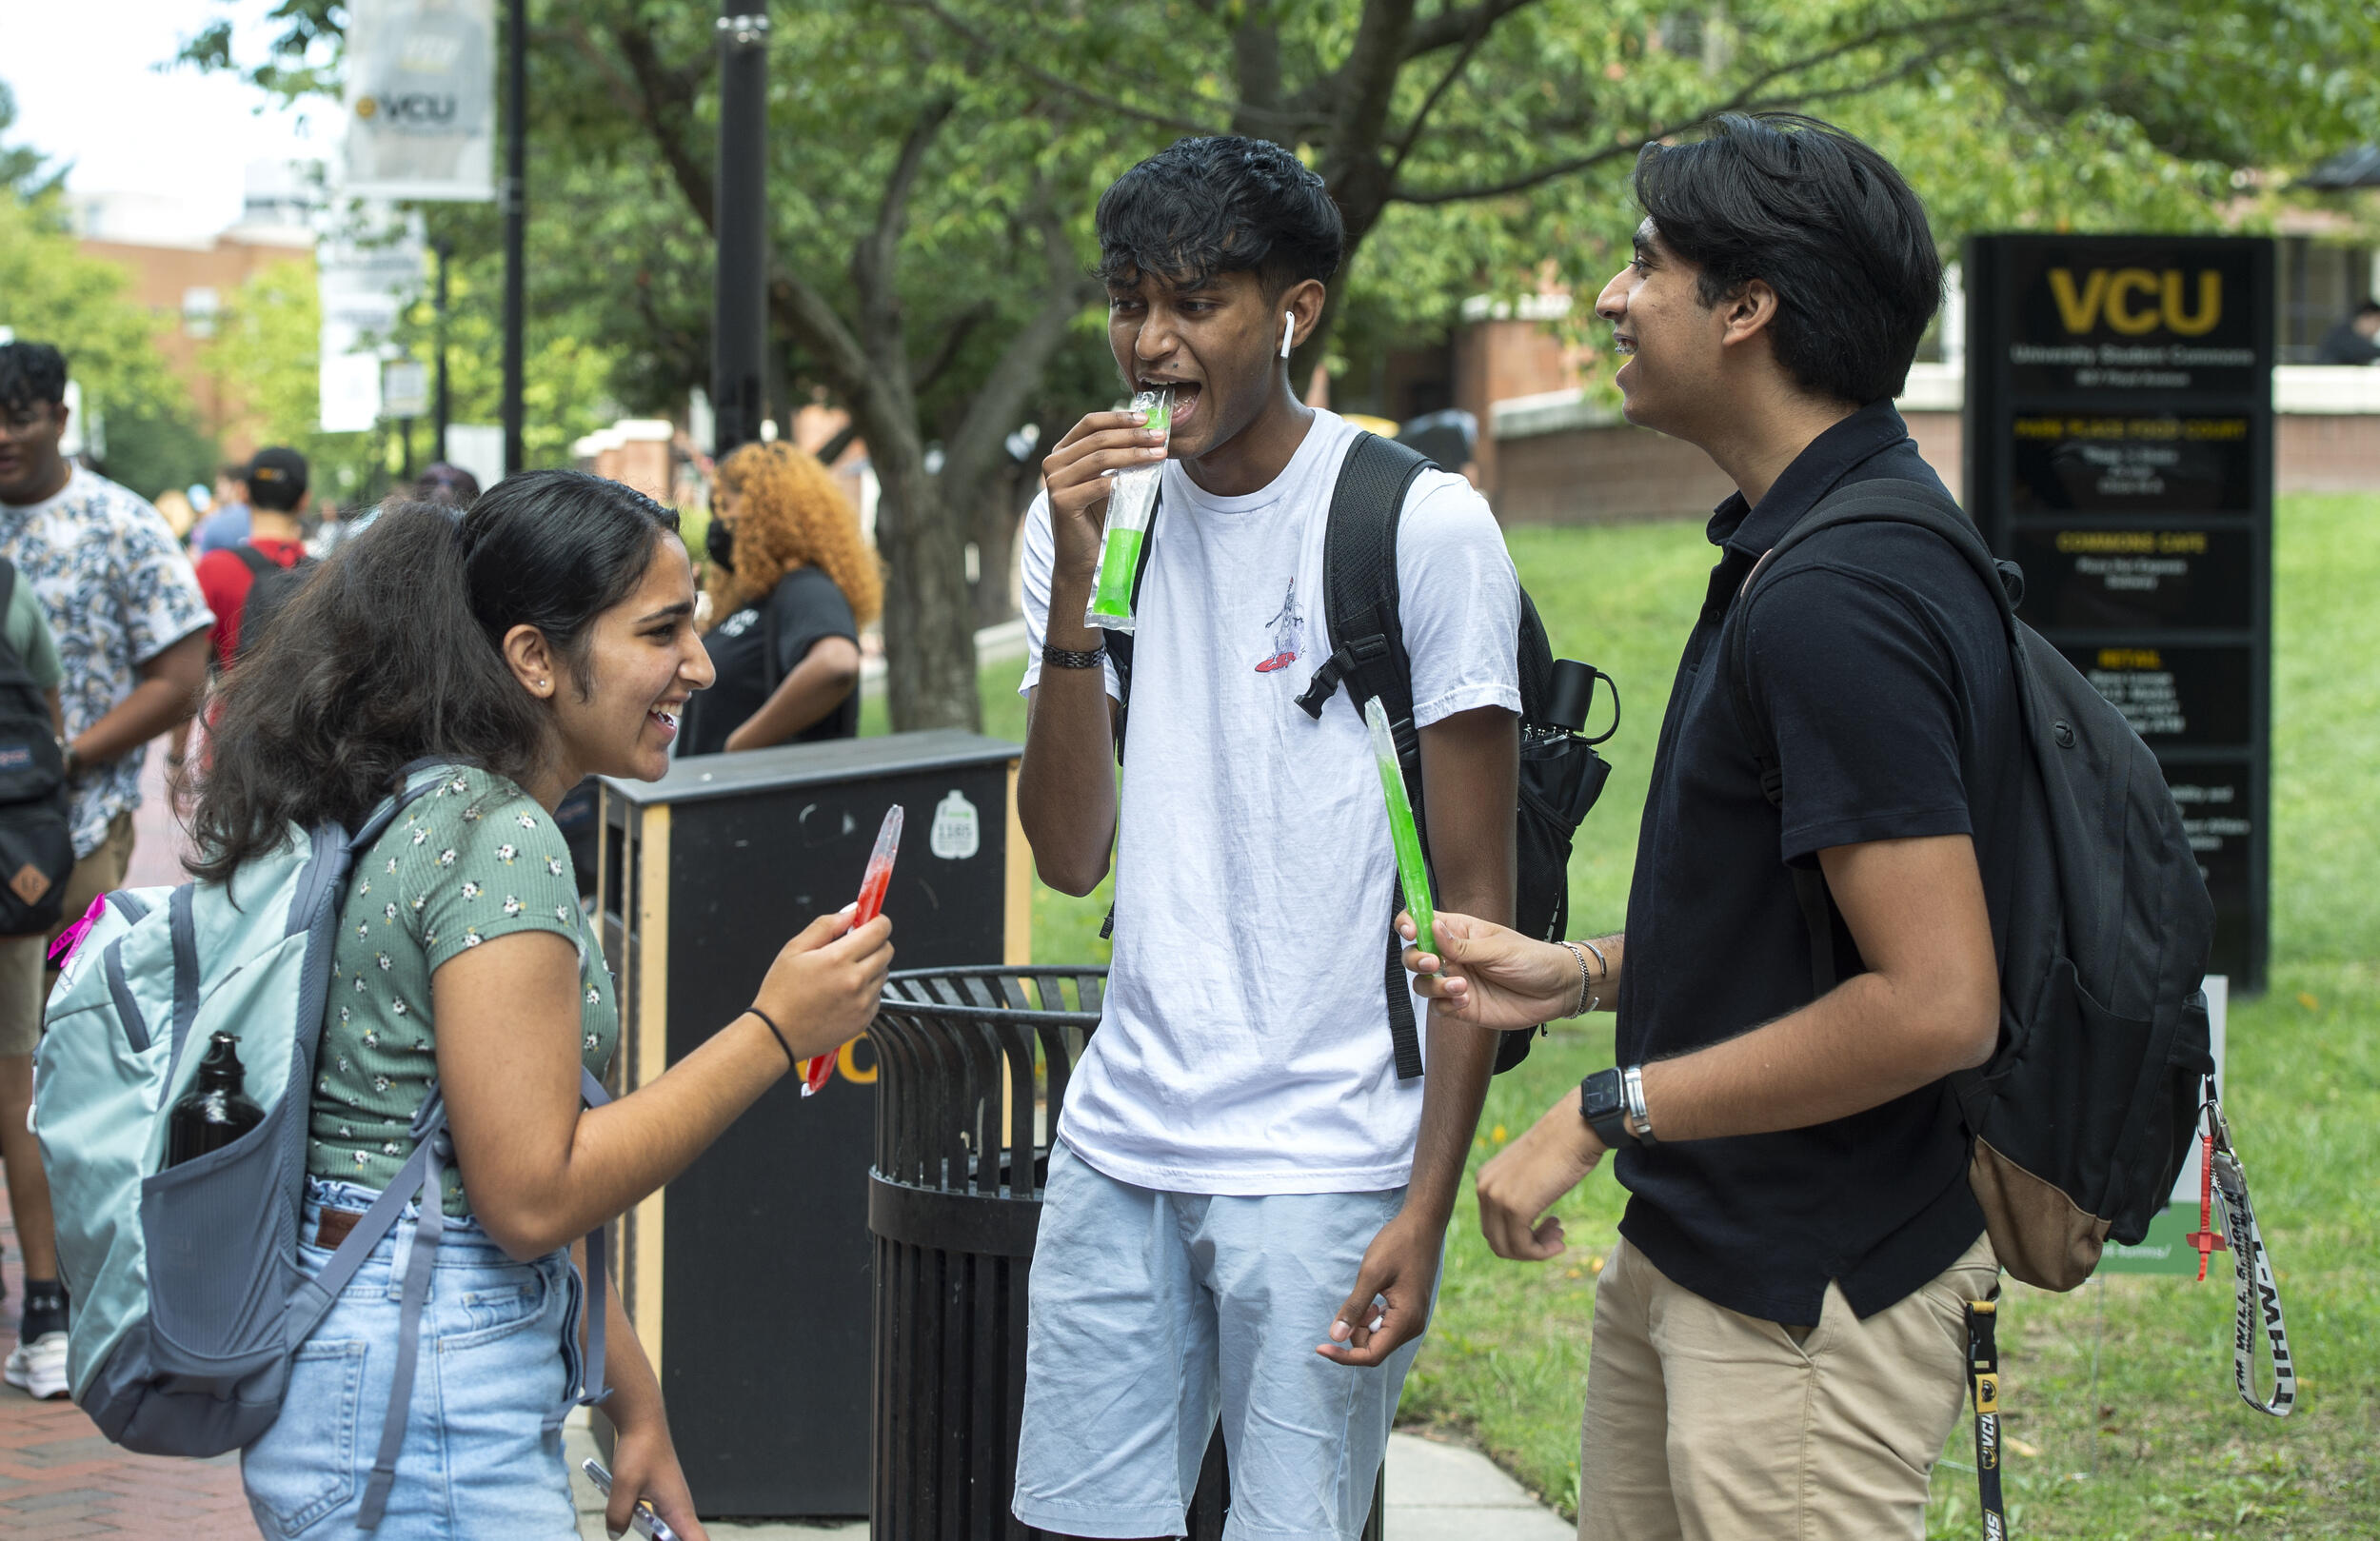 Three students standing in a circle talking to each other while eating ice pops 